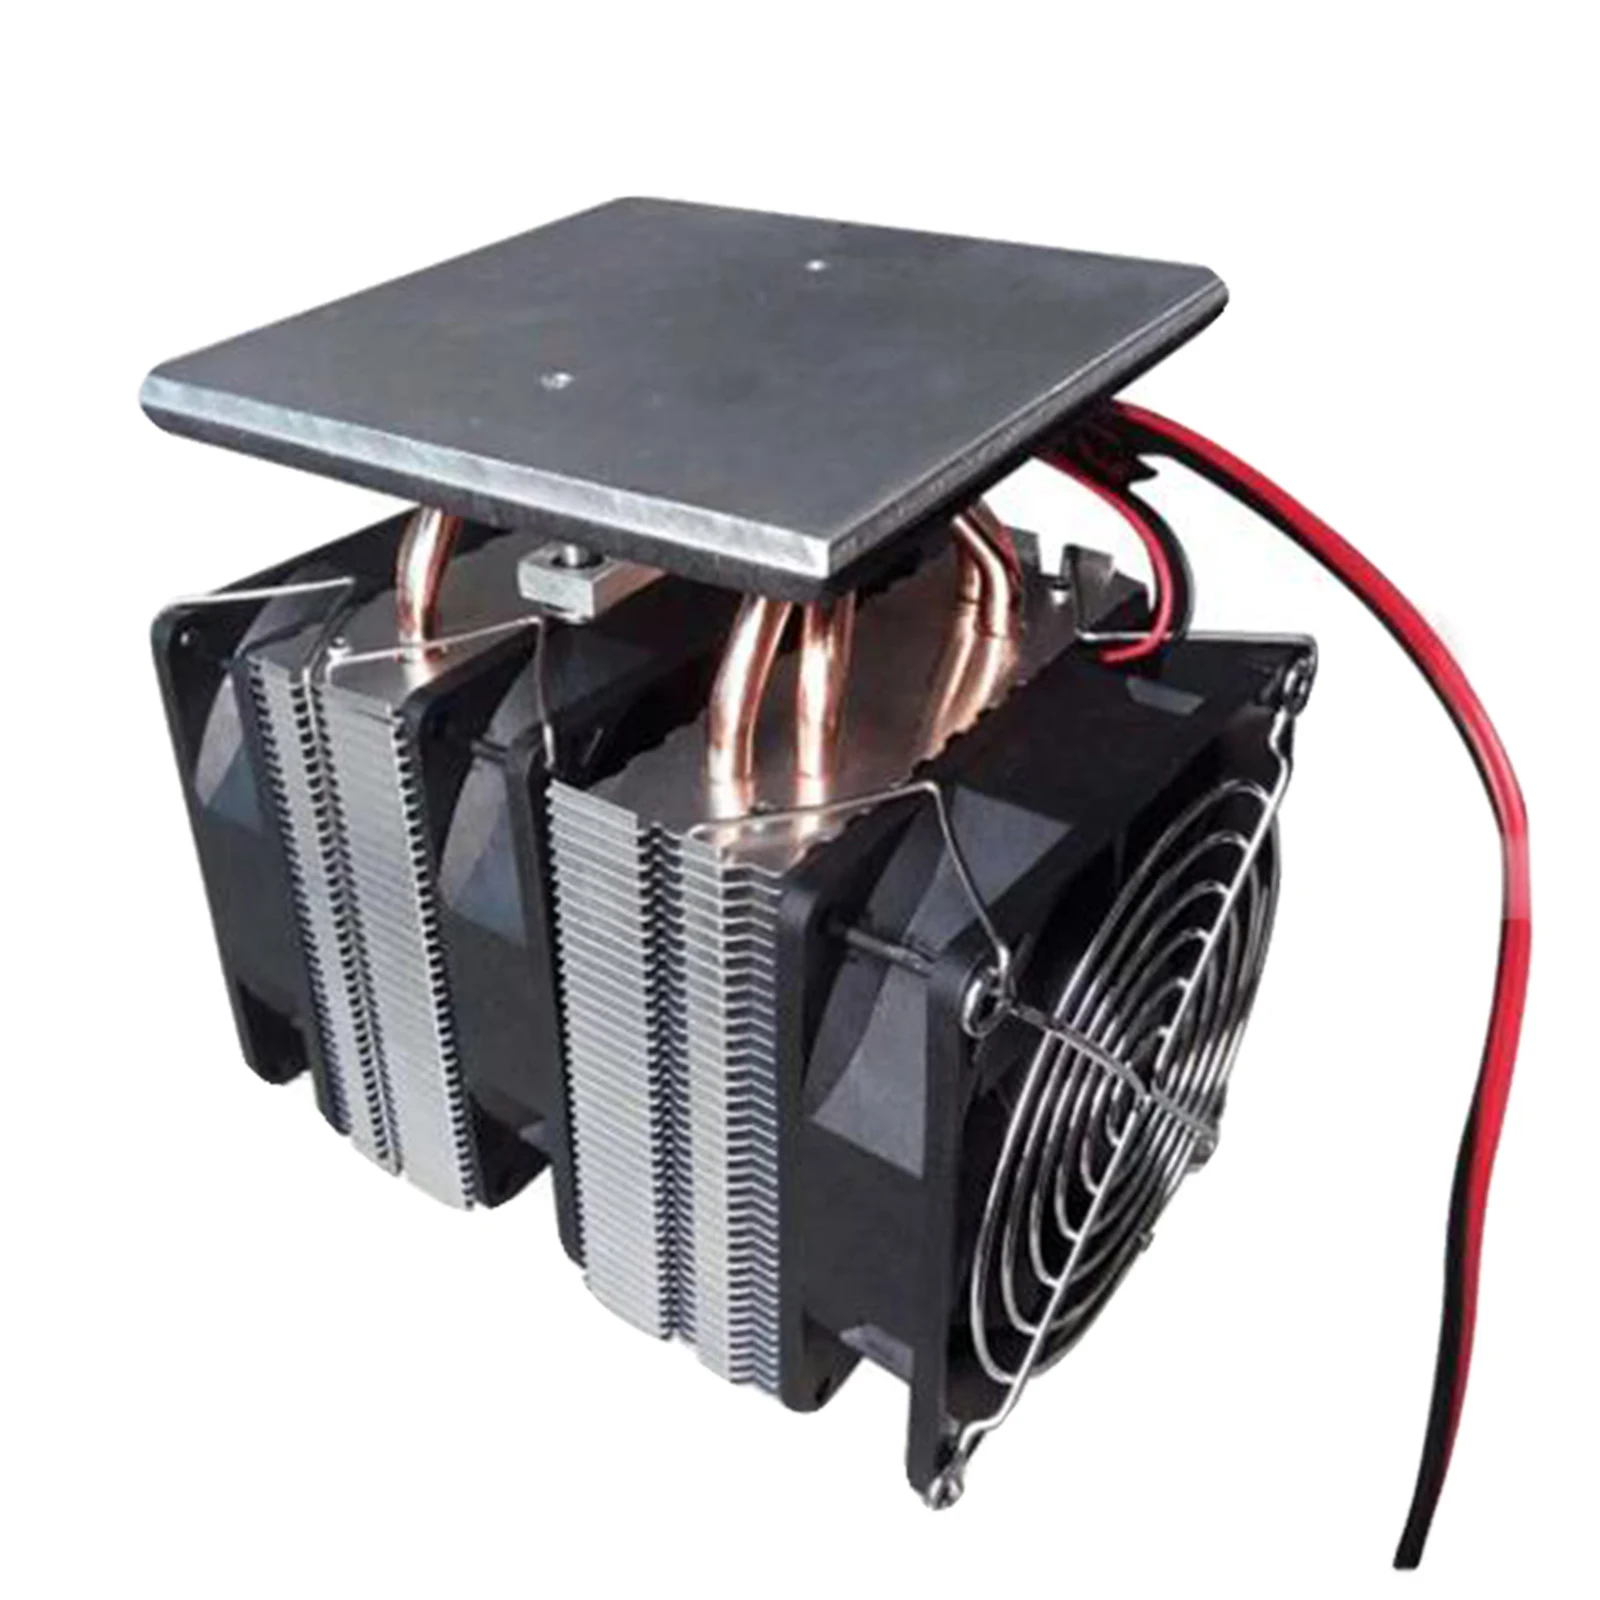 12V 240W Cooling System with Fan with Power Thermoelectric Peltier Cold Plate for Test Bench Plate Cooling